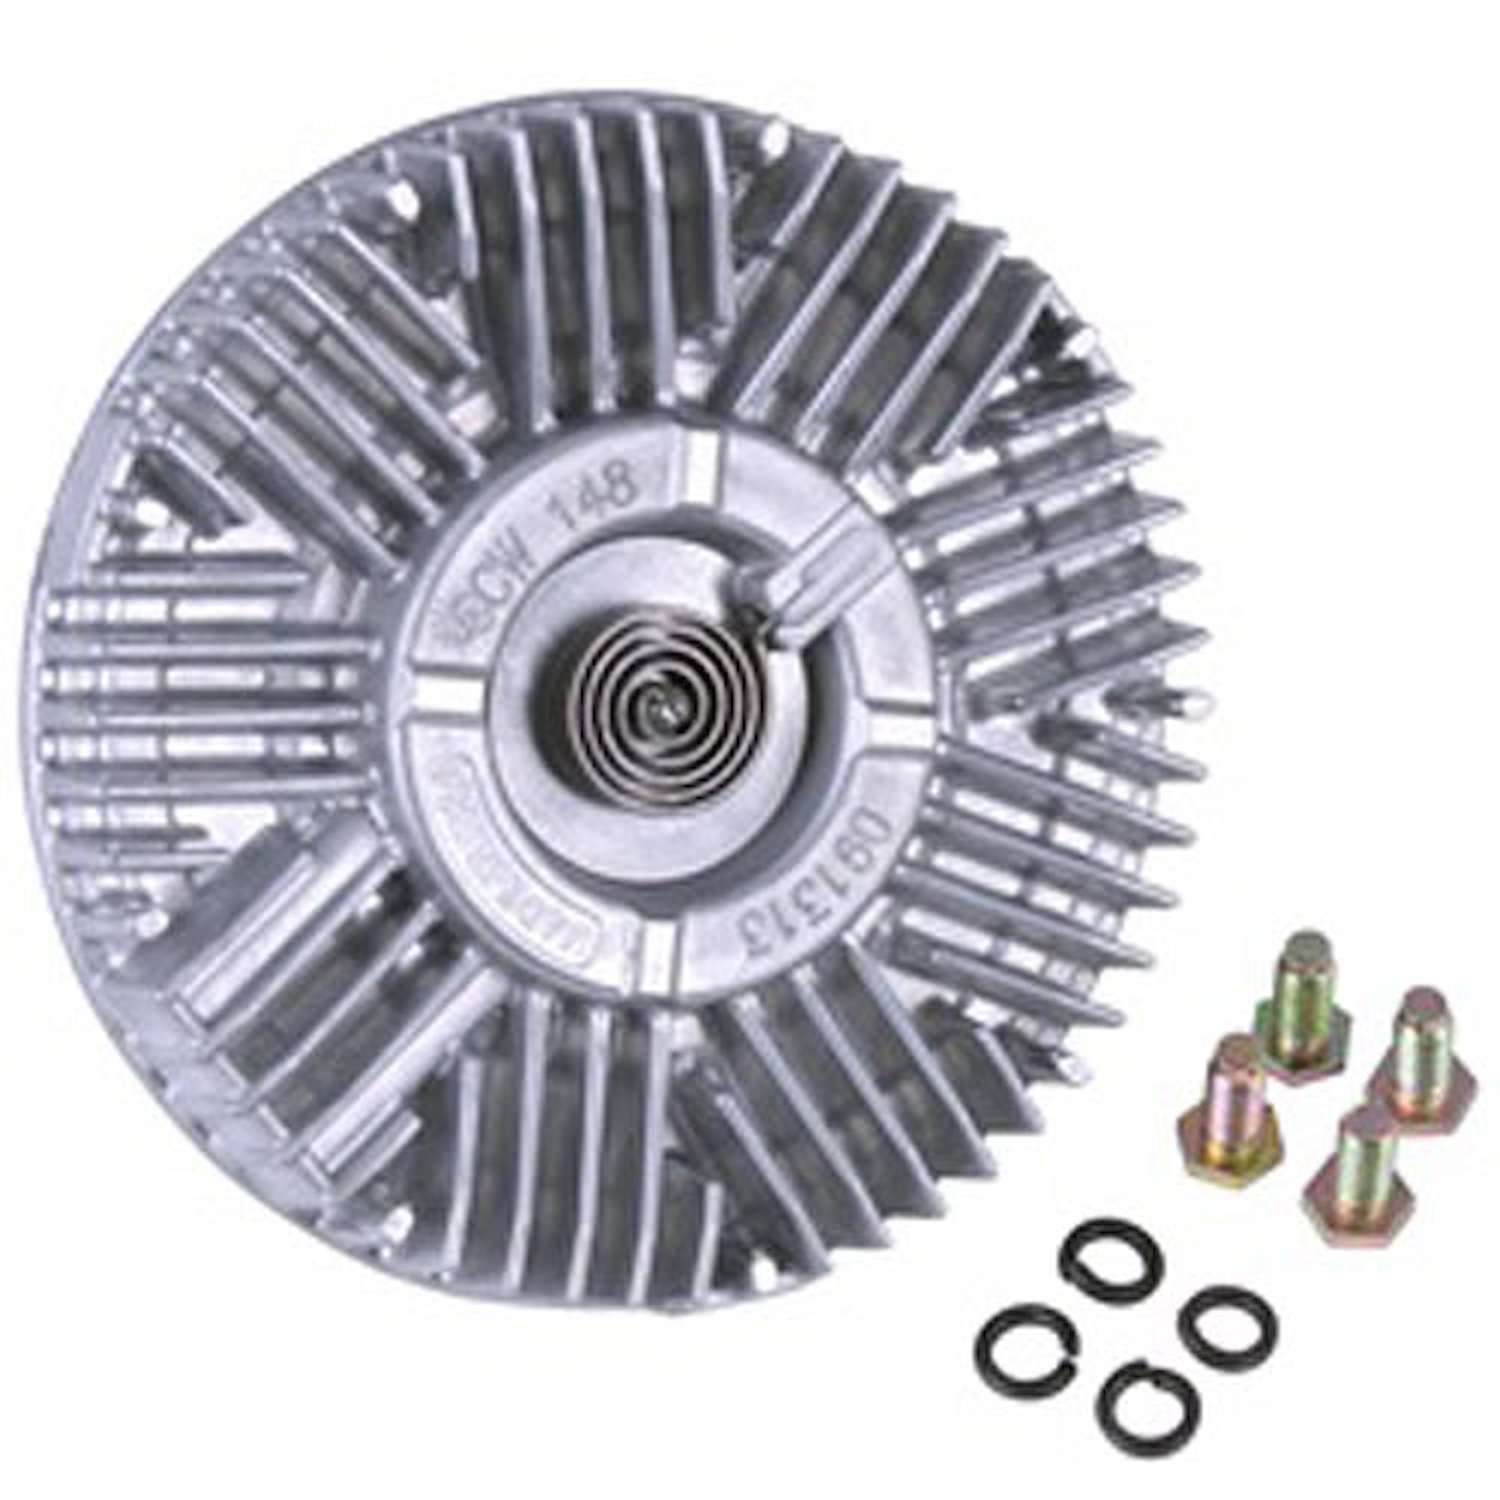 Replacement fan clutch from Omix-ADA, Fits 97-99 Jeep Wranglers with a 4.0L engine.